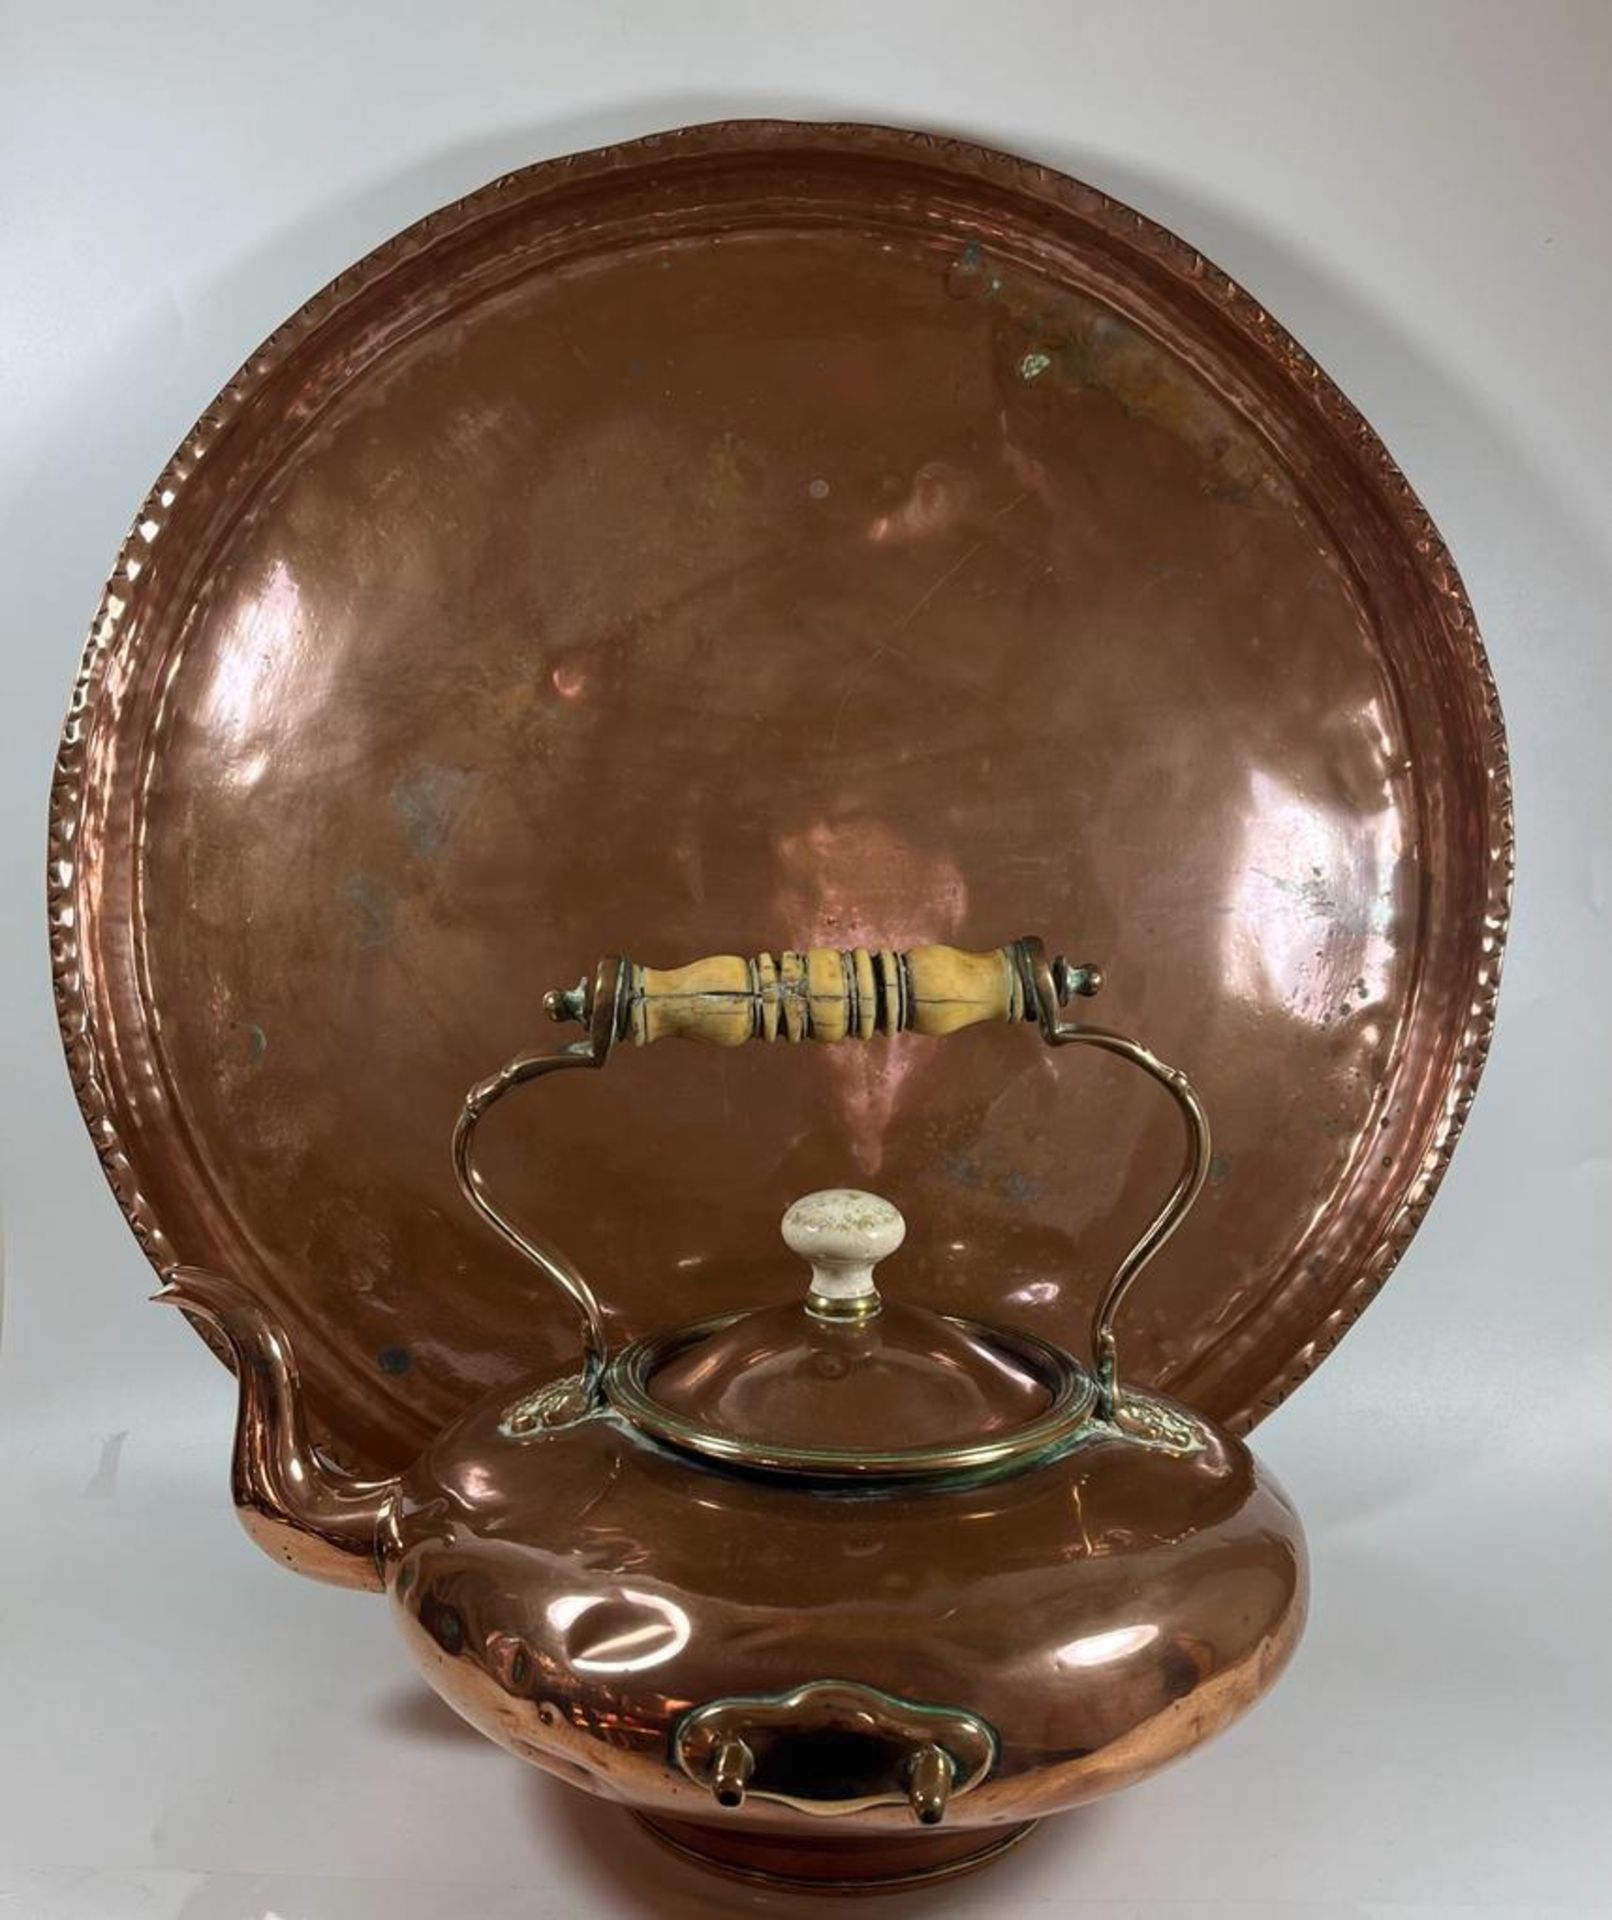 TWO VINTAGE COPPER ITEMS - A SPIRIT KETTLE WITH WOODEN HANDLE AND LARGE ARTS AND CRAFTS CIRCULAR